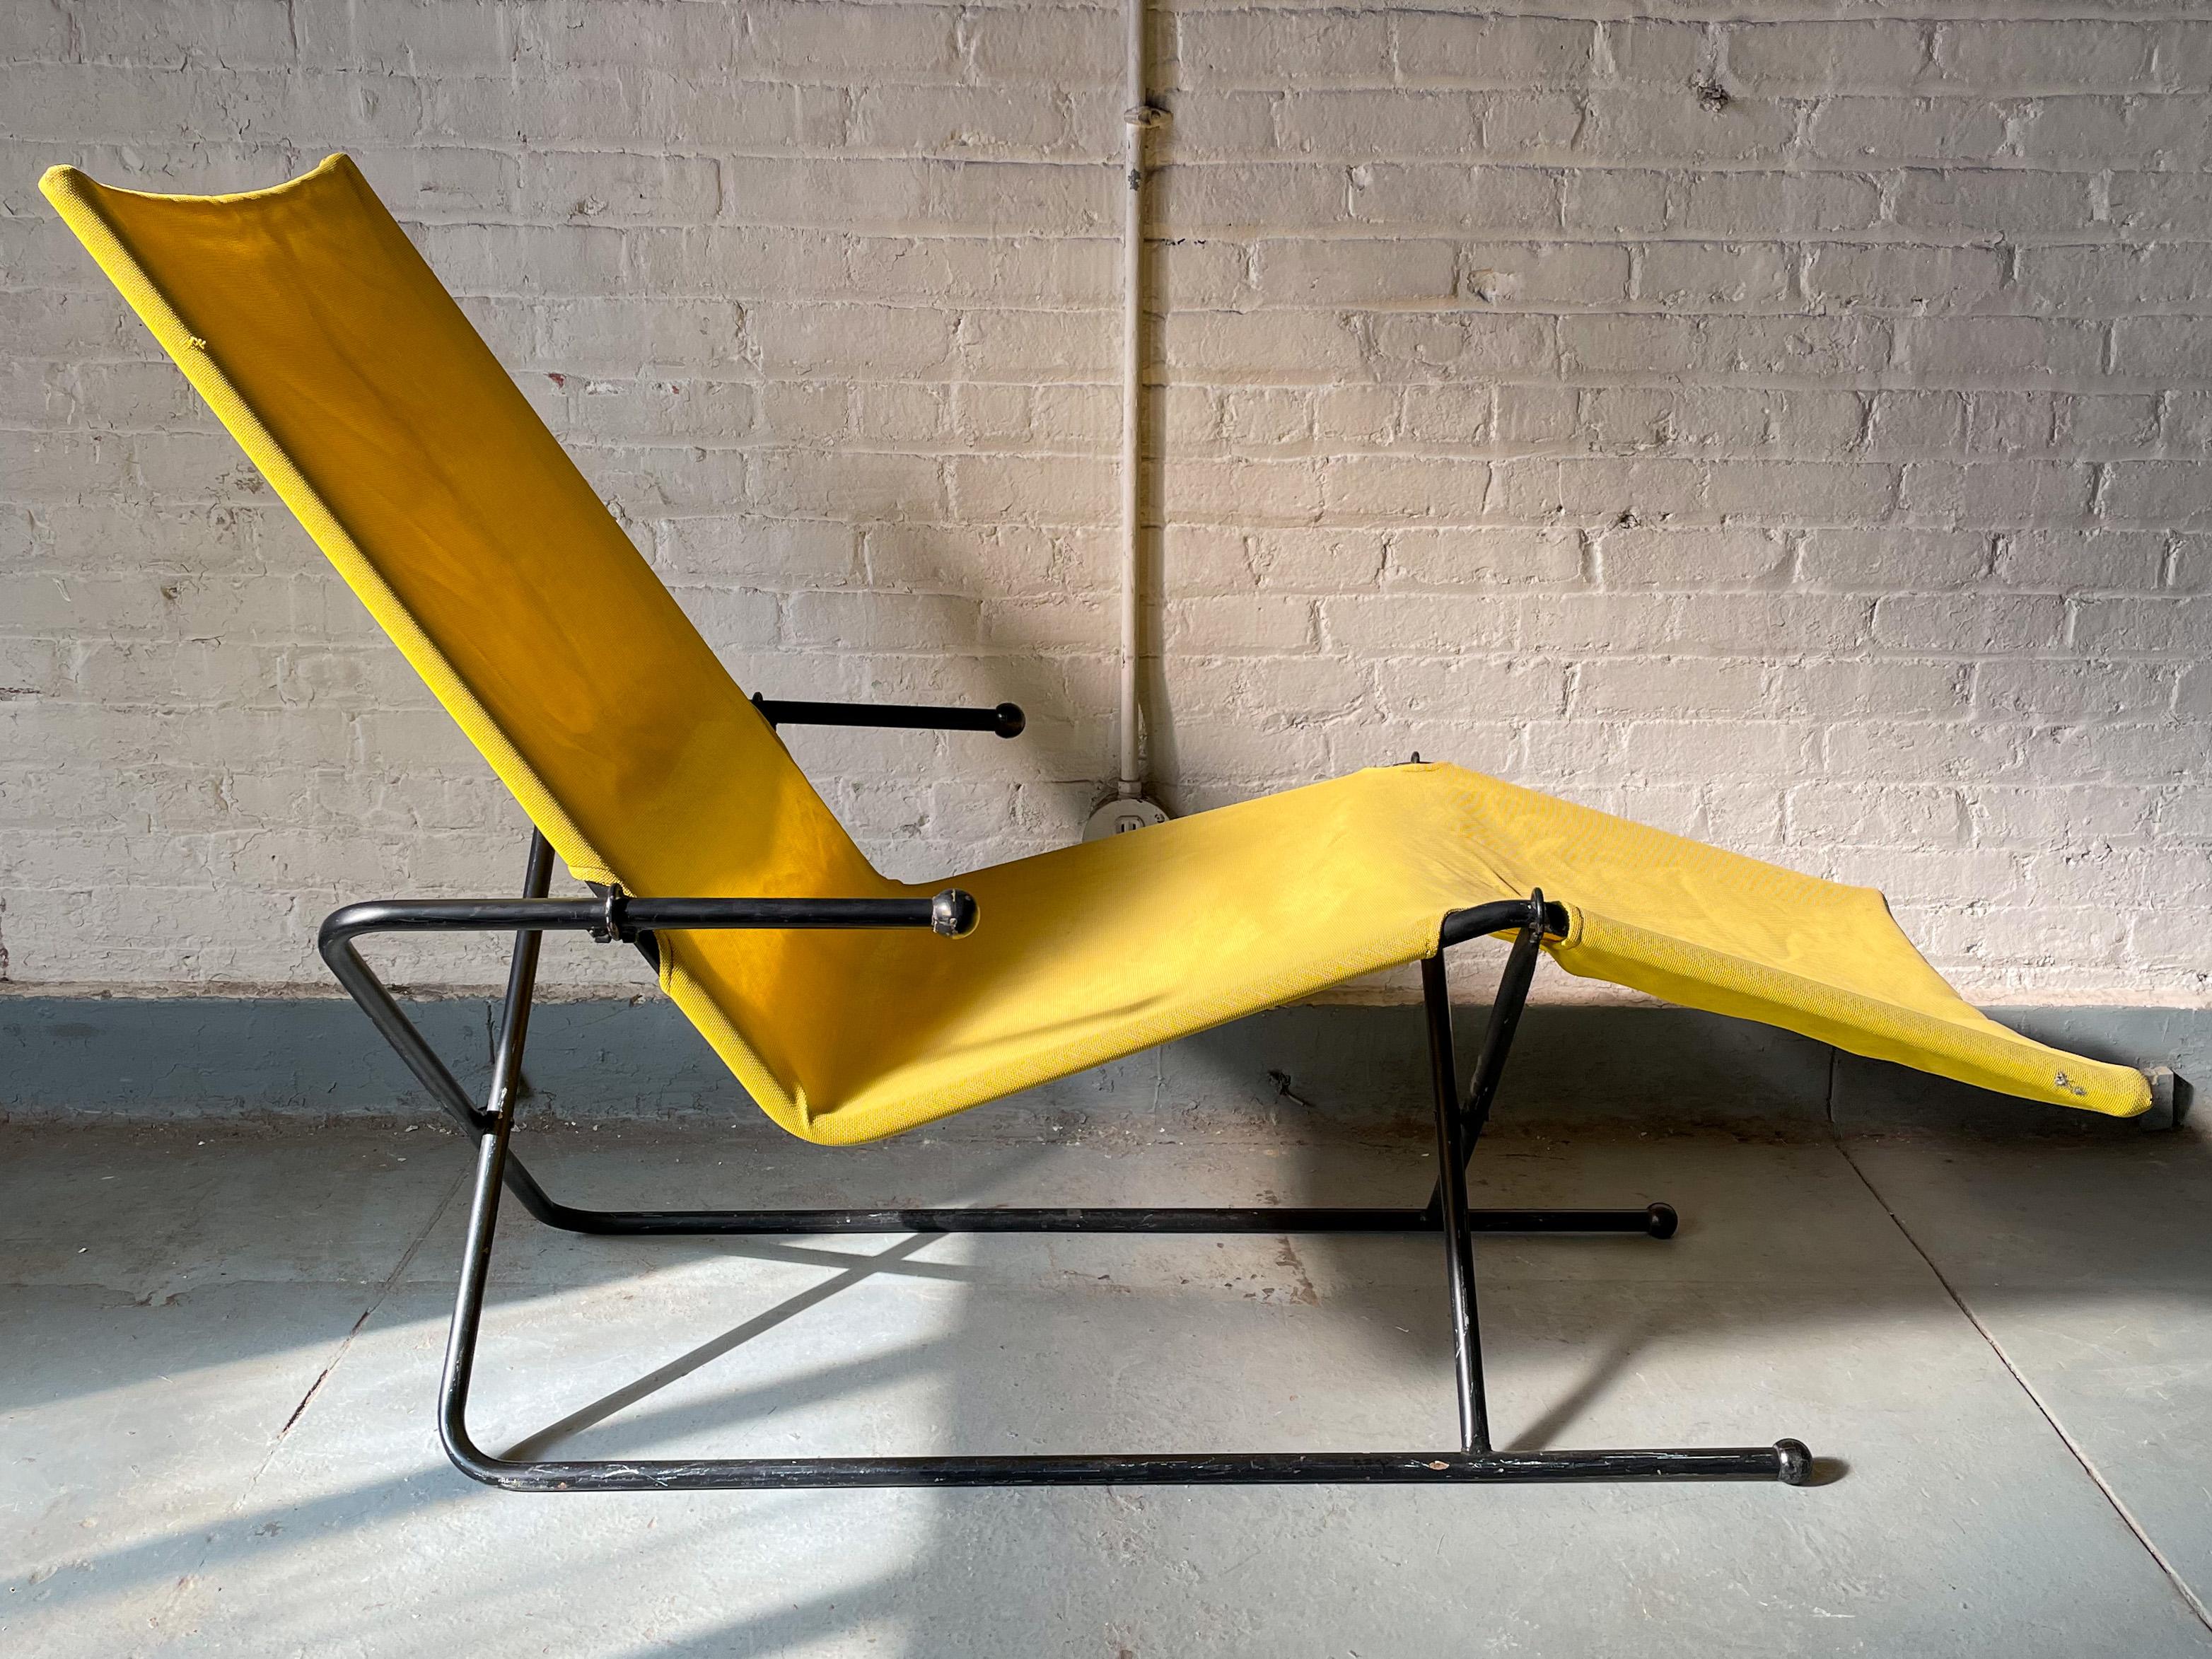 Chaise of tubular steel with plastic end caps and its original mesh sling. By Austrian/American designer Henry Glass, 1960’s. Prototype from his Sling-Line series of mobile and space-saving folding furniture. Glass worked with Gilbert Rohde in New